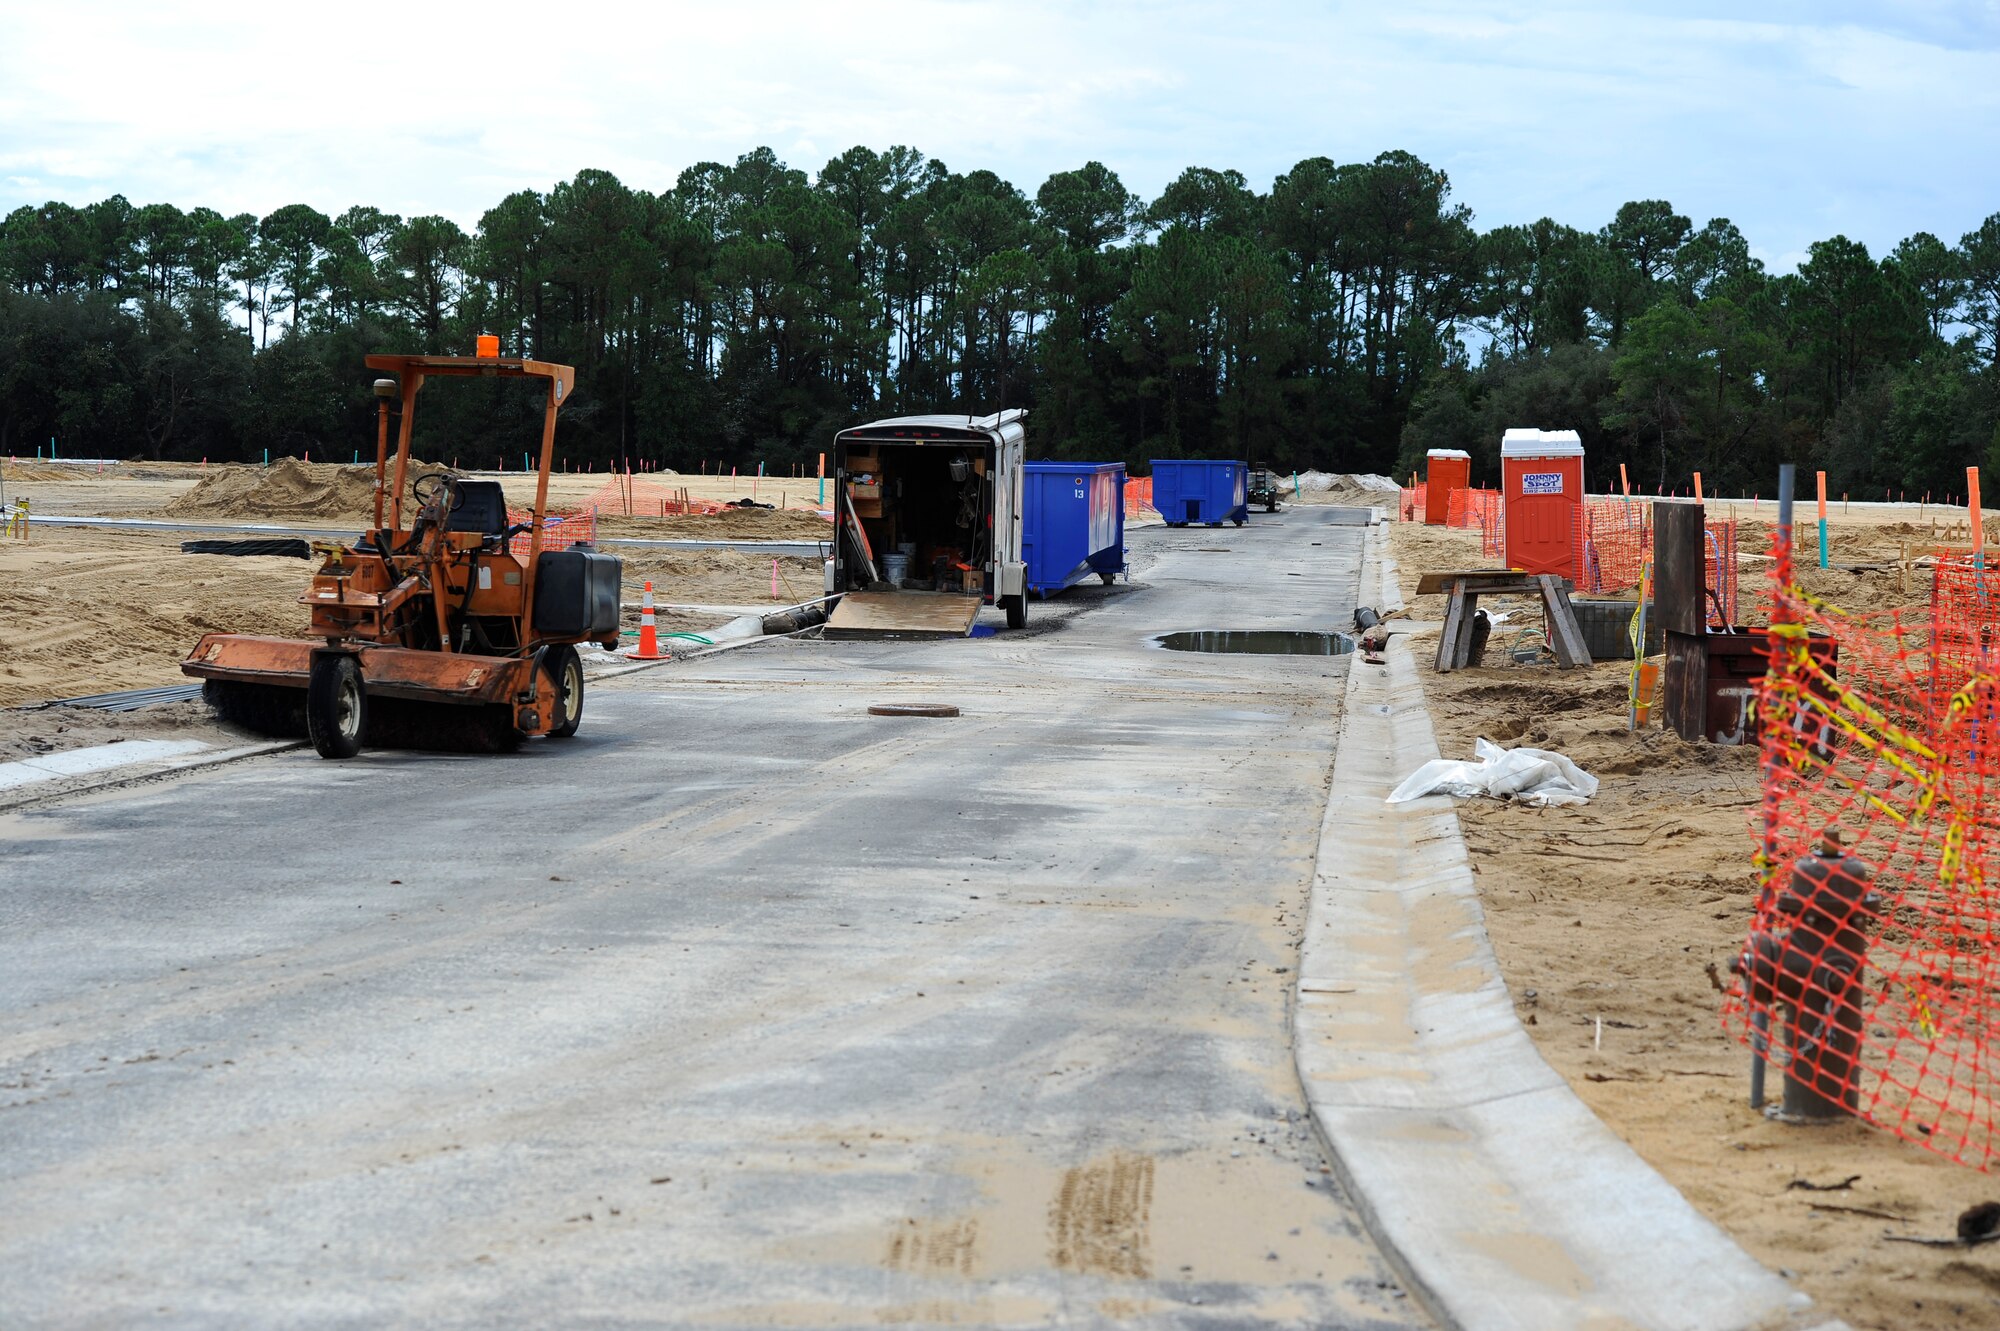 A recently constructed road runs through a portion of the future Osprey neighborhood on Hurlburt Field, Fla., Oct. 2, 2014. The road is part of a neighborhood that will consist of 63 new single family homes for senior non-commissioned officers and chief master sergeants. (U.S. Air Force photo/Staff Sgt. Sarah Hanson)